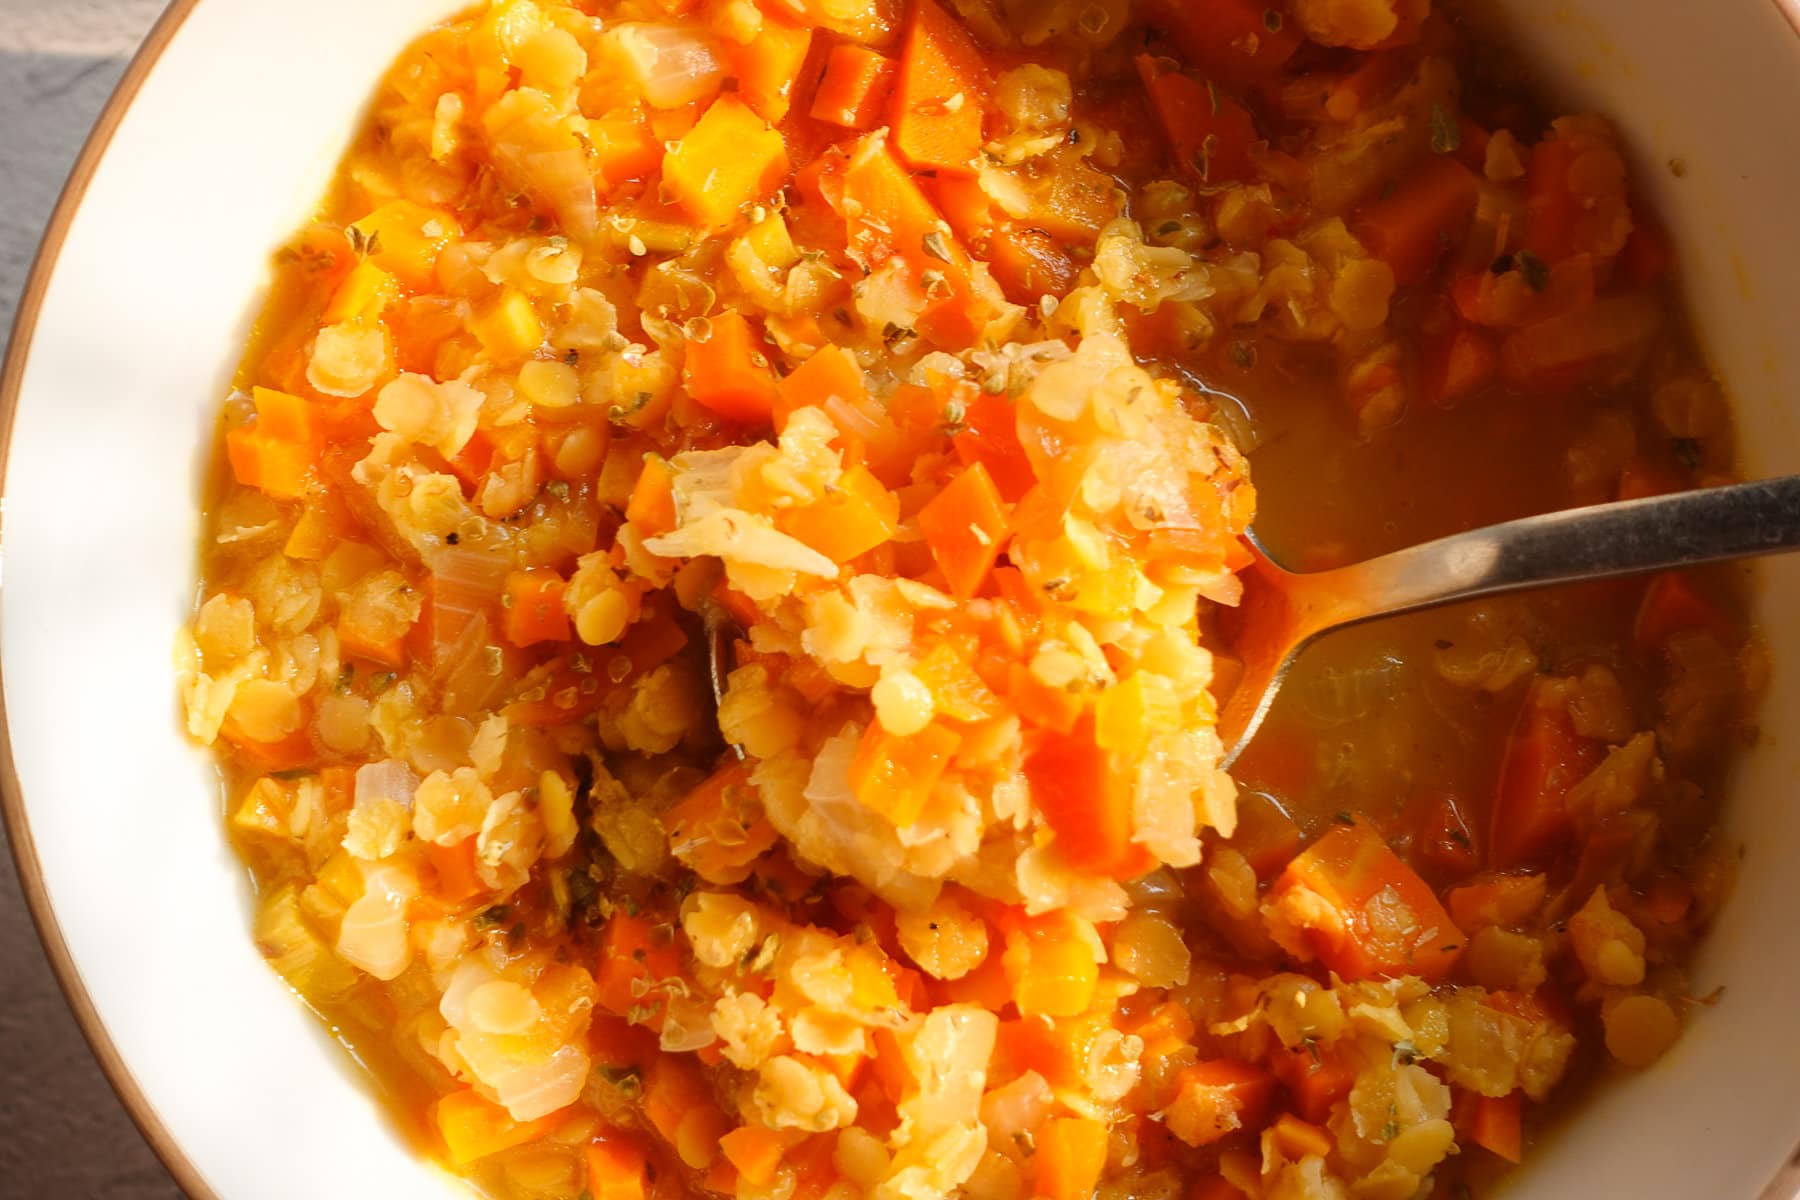 Simmer the red lentil carrot soup until soft and tender